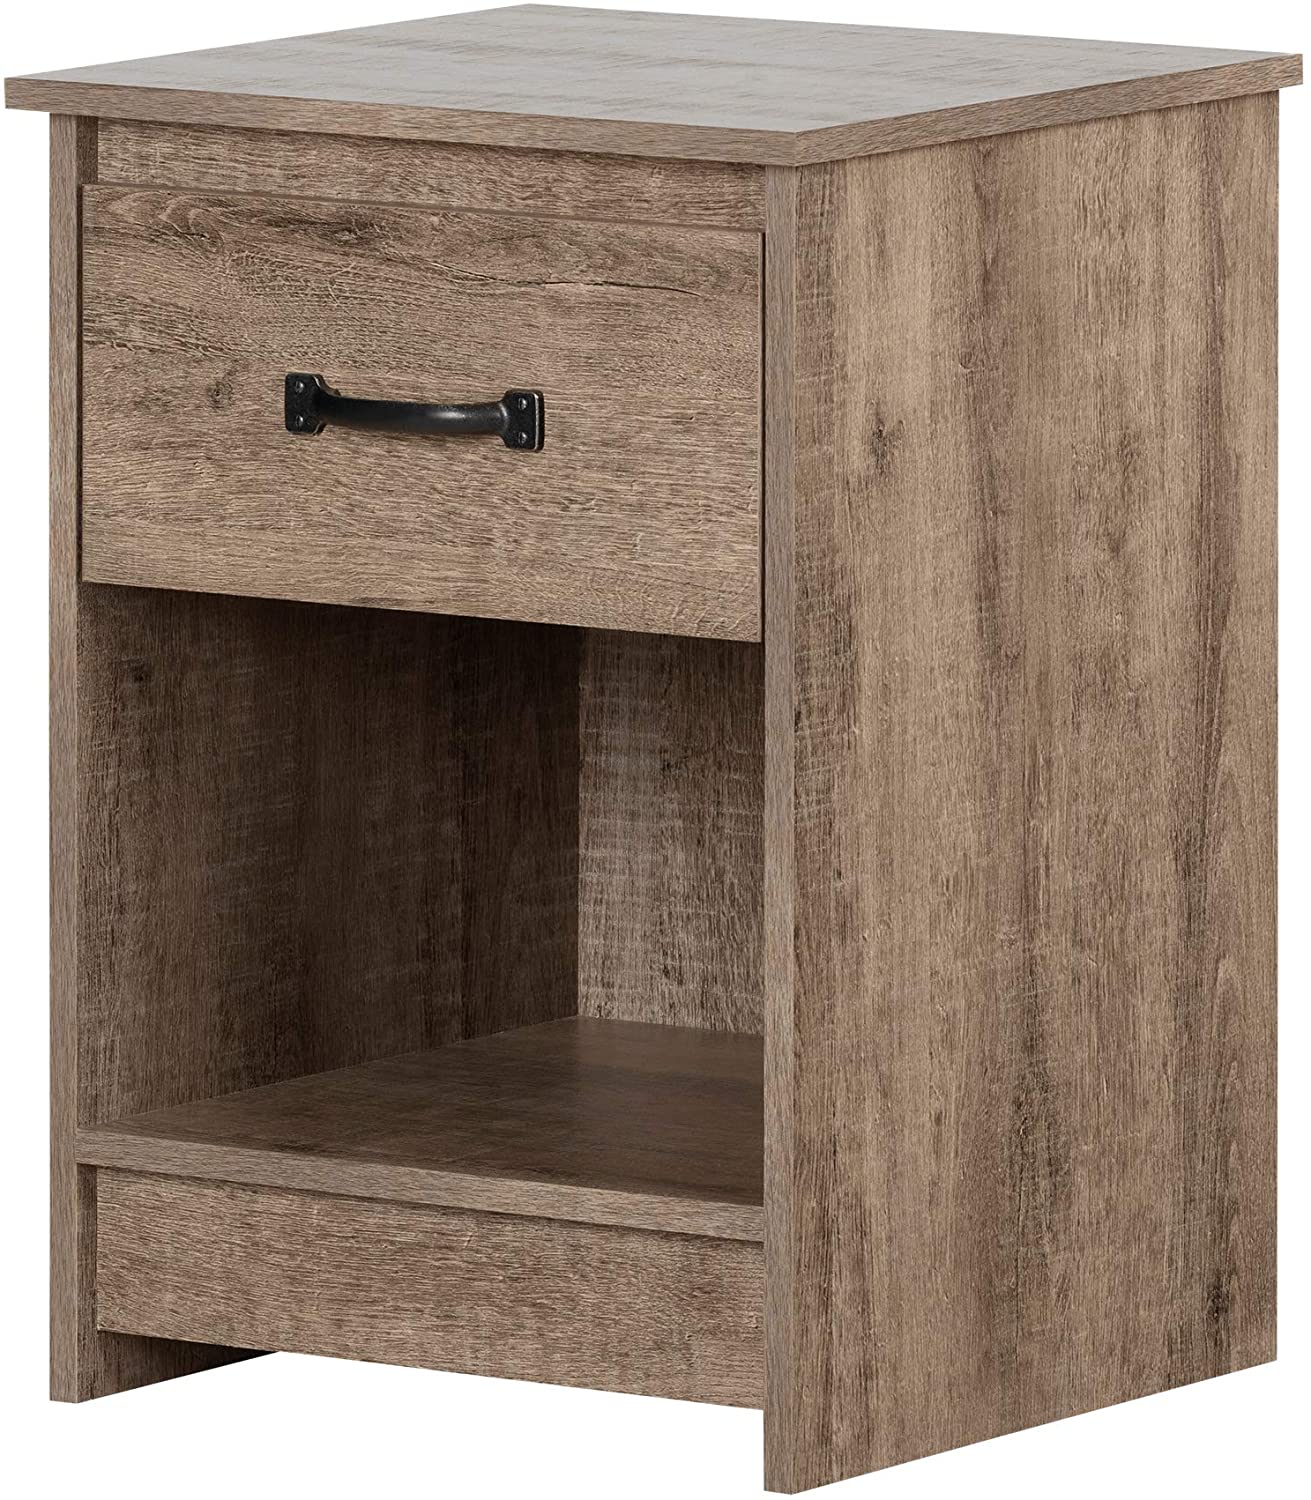 Modern Wooden Nightstand Bedside Table With Drawers In Bedroom Wooden Sofa Side Table In Living Room